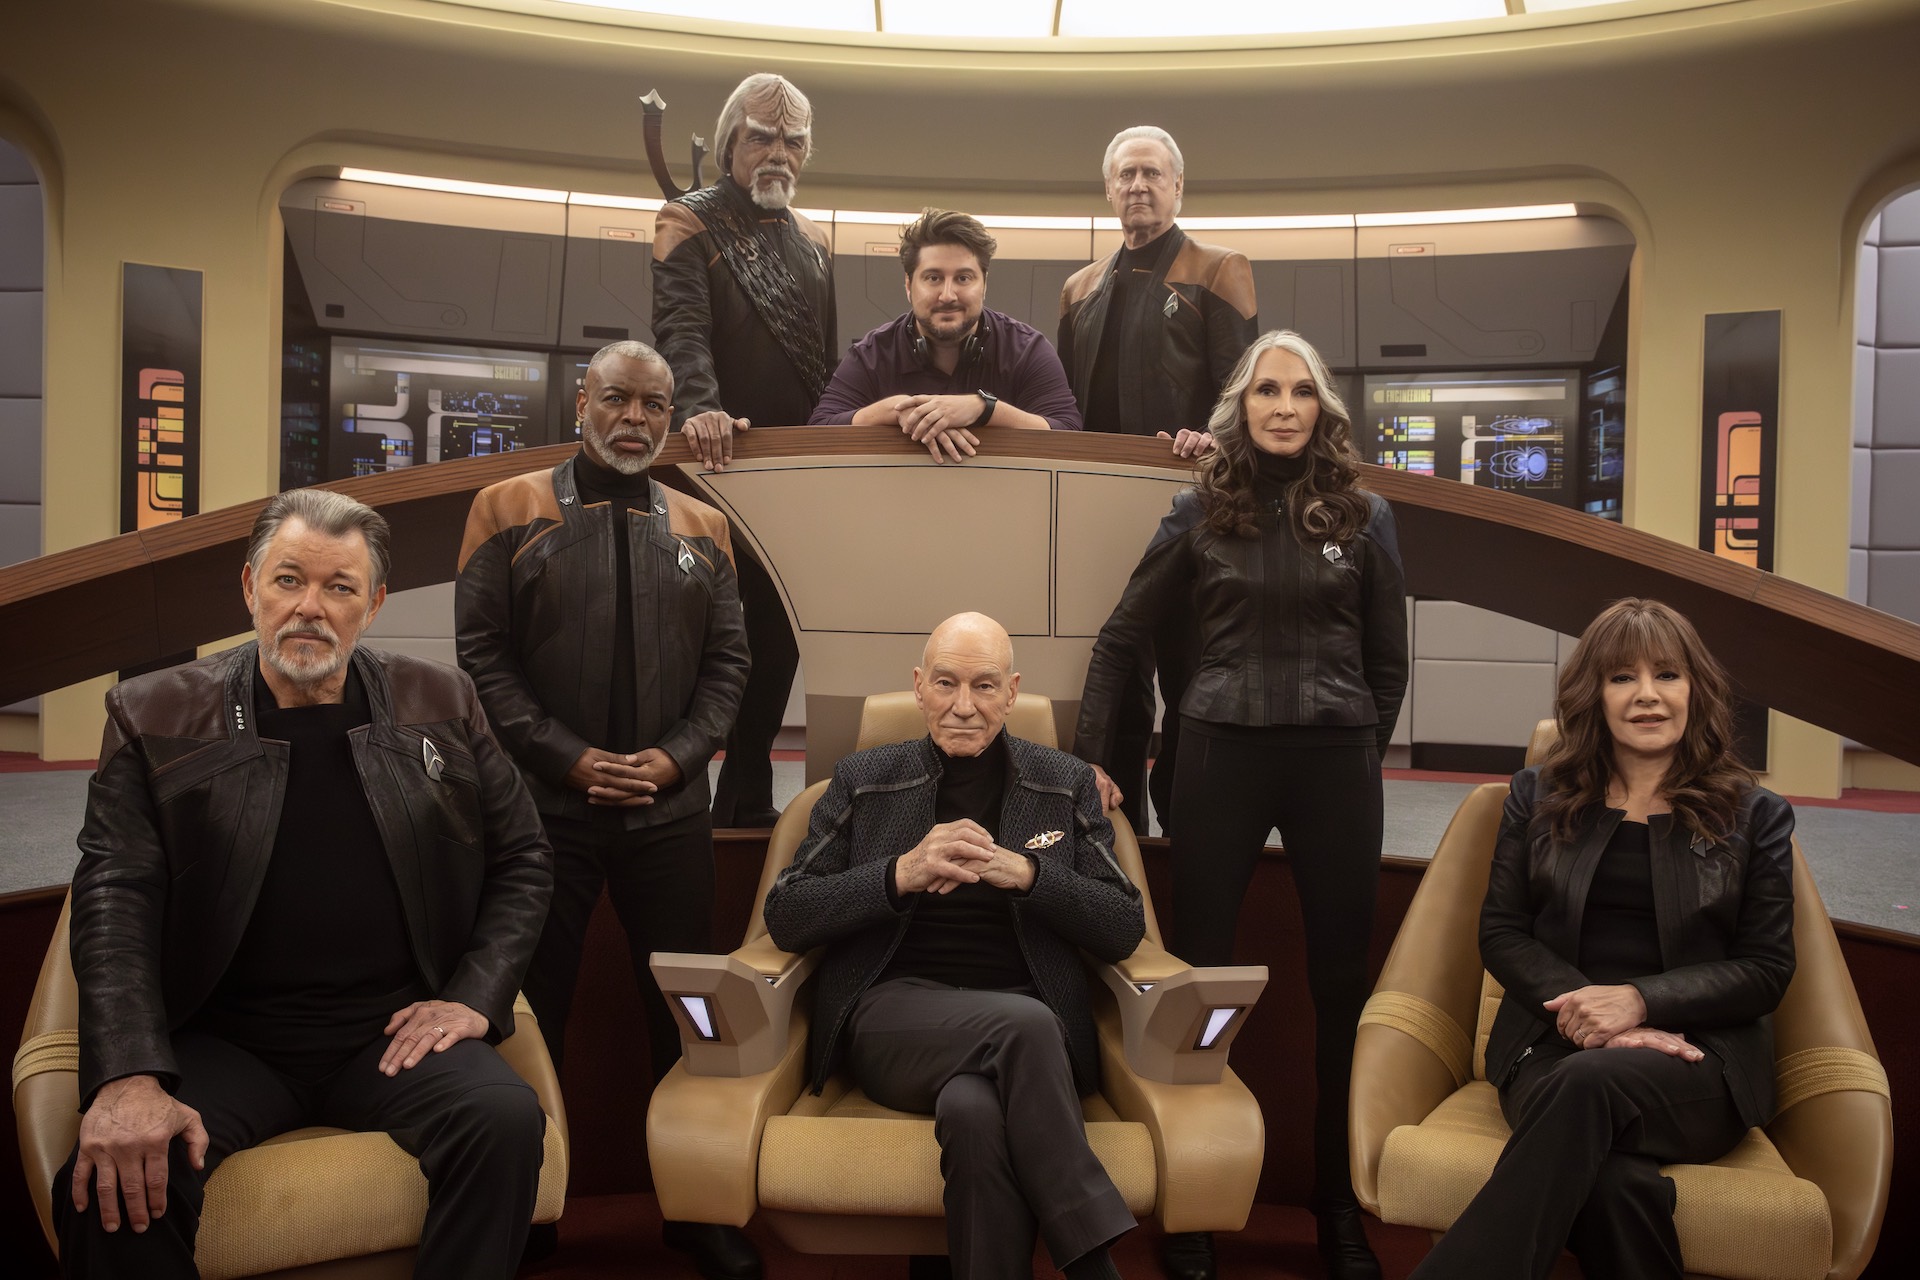 Jonathan Frakes as Will Riker, LeVar Burton as Geordi La Forge, Patrick Crusher as Picard, Gates McFadden as Dr. Beverly Crusher Marina Sirtis as Deanna Troi, Michael Dorn as Worf, Terry Matalas and Brent Spiner as Data in"Vox" Episode 309, Star Trek: Picard on Paramount+.  Photo Credit: Trae Patton/Paramount+. ©2021 Viacom, International Inc.  All Rights Reserved.